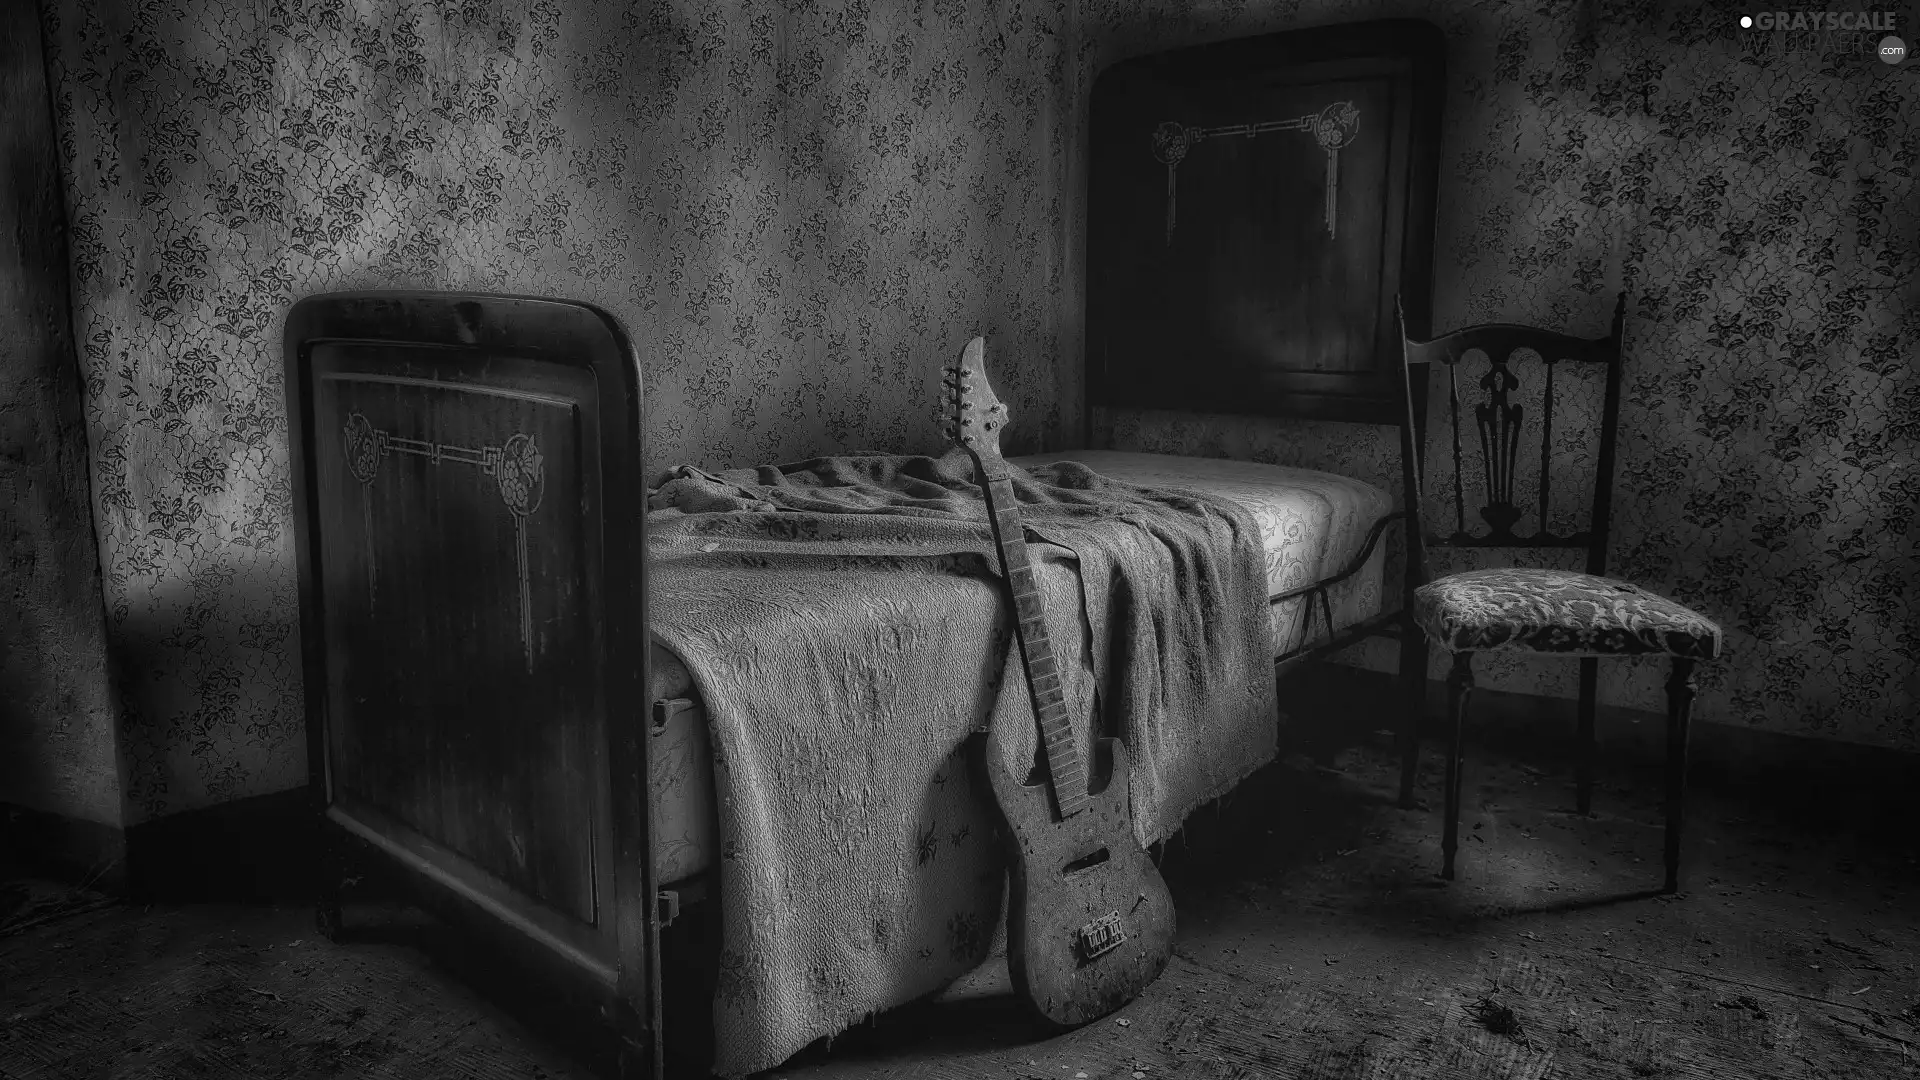 Guitar, Chair, Room, White Bed, Neglected